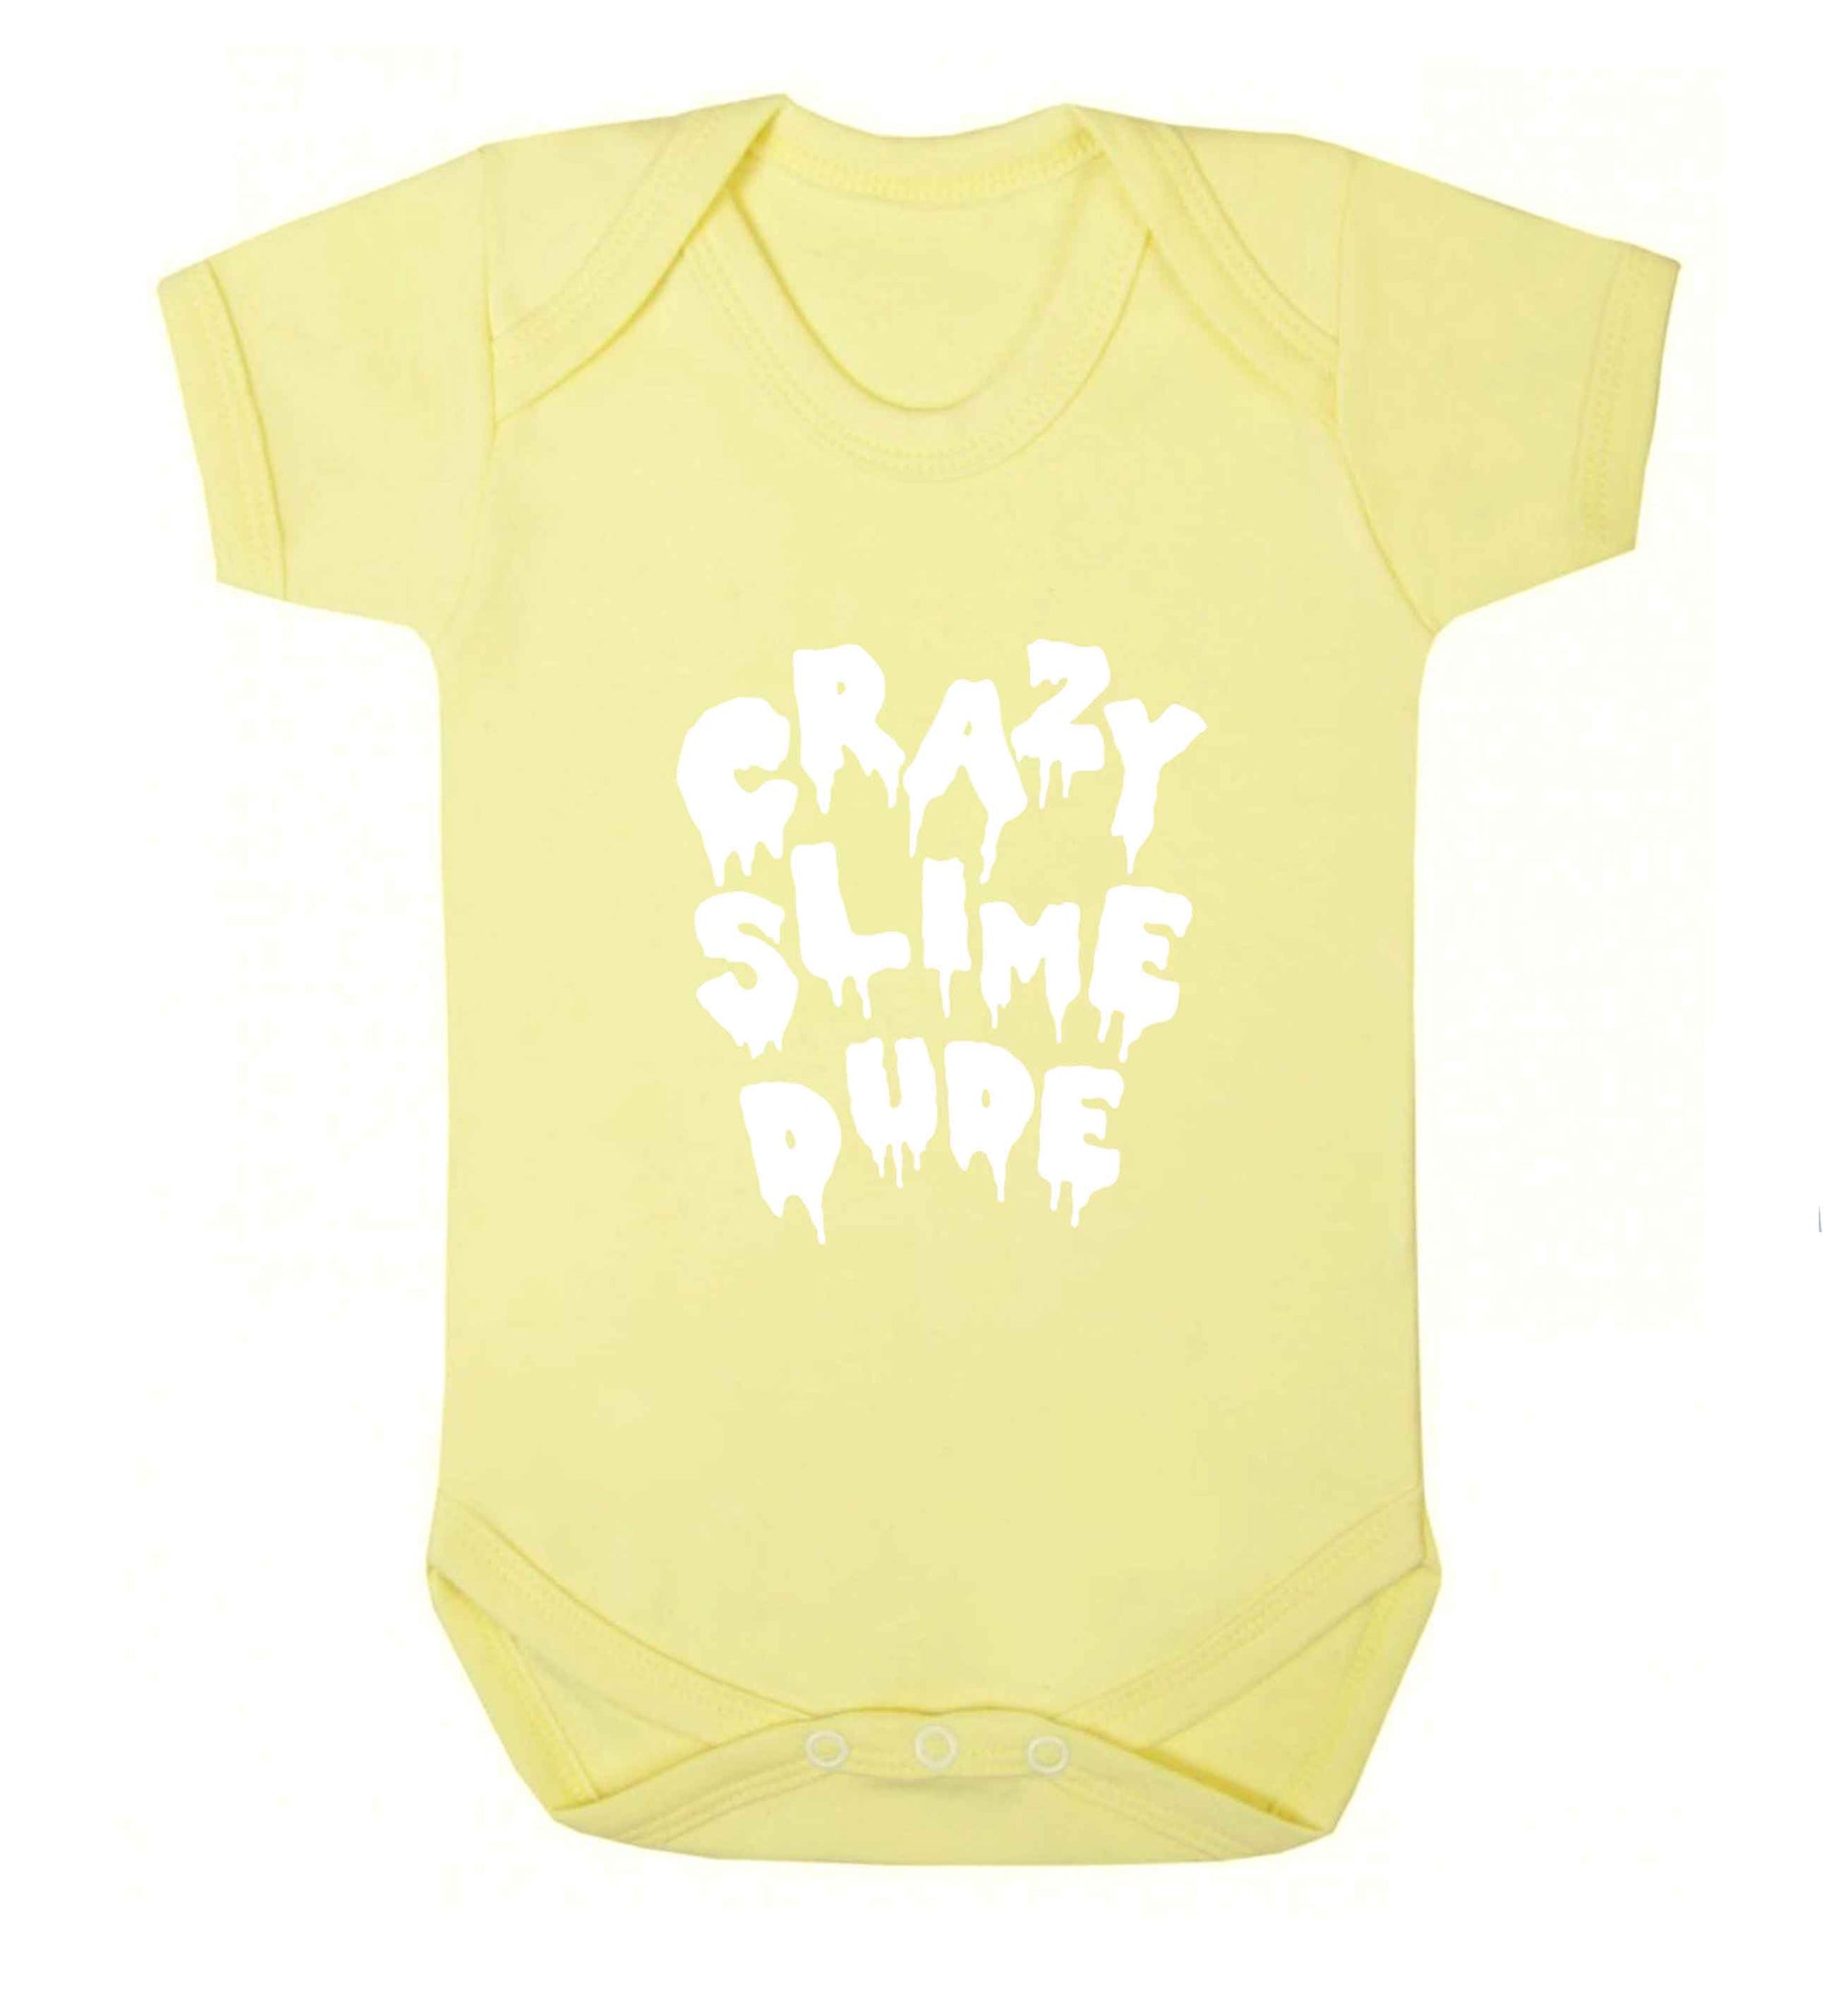 Crazy slime dude baby vest pale yellow 18-24 months